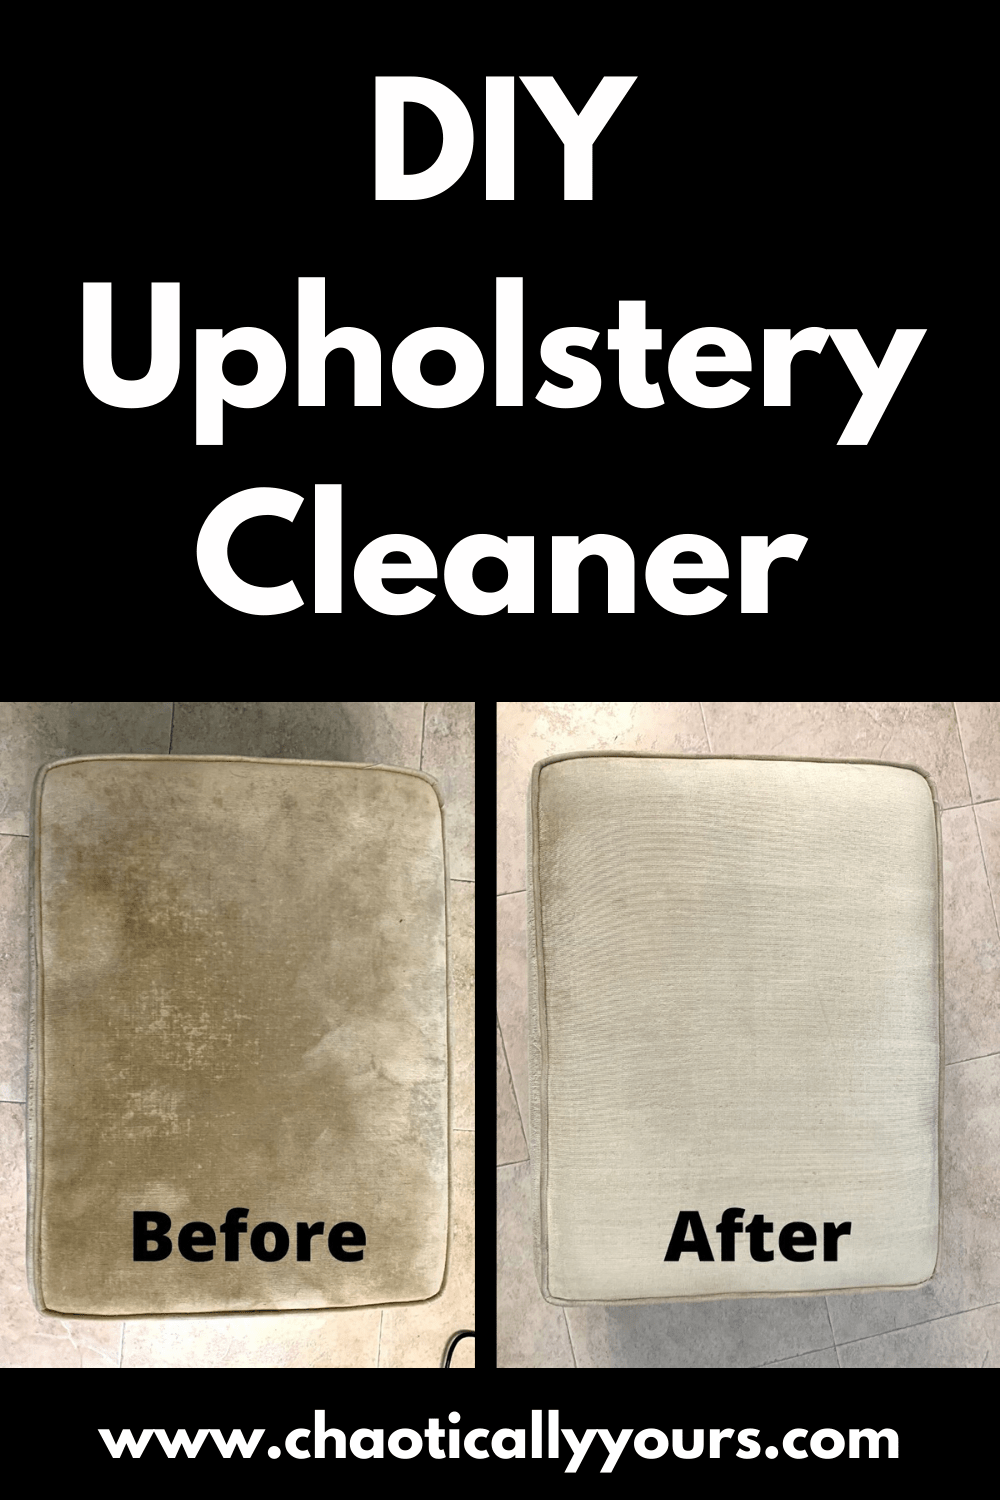 Diy Upholstery Cleaner Vs Bis Cleaning Solution What Works Better Chaotically Yours